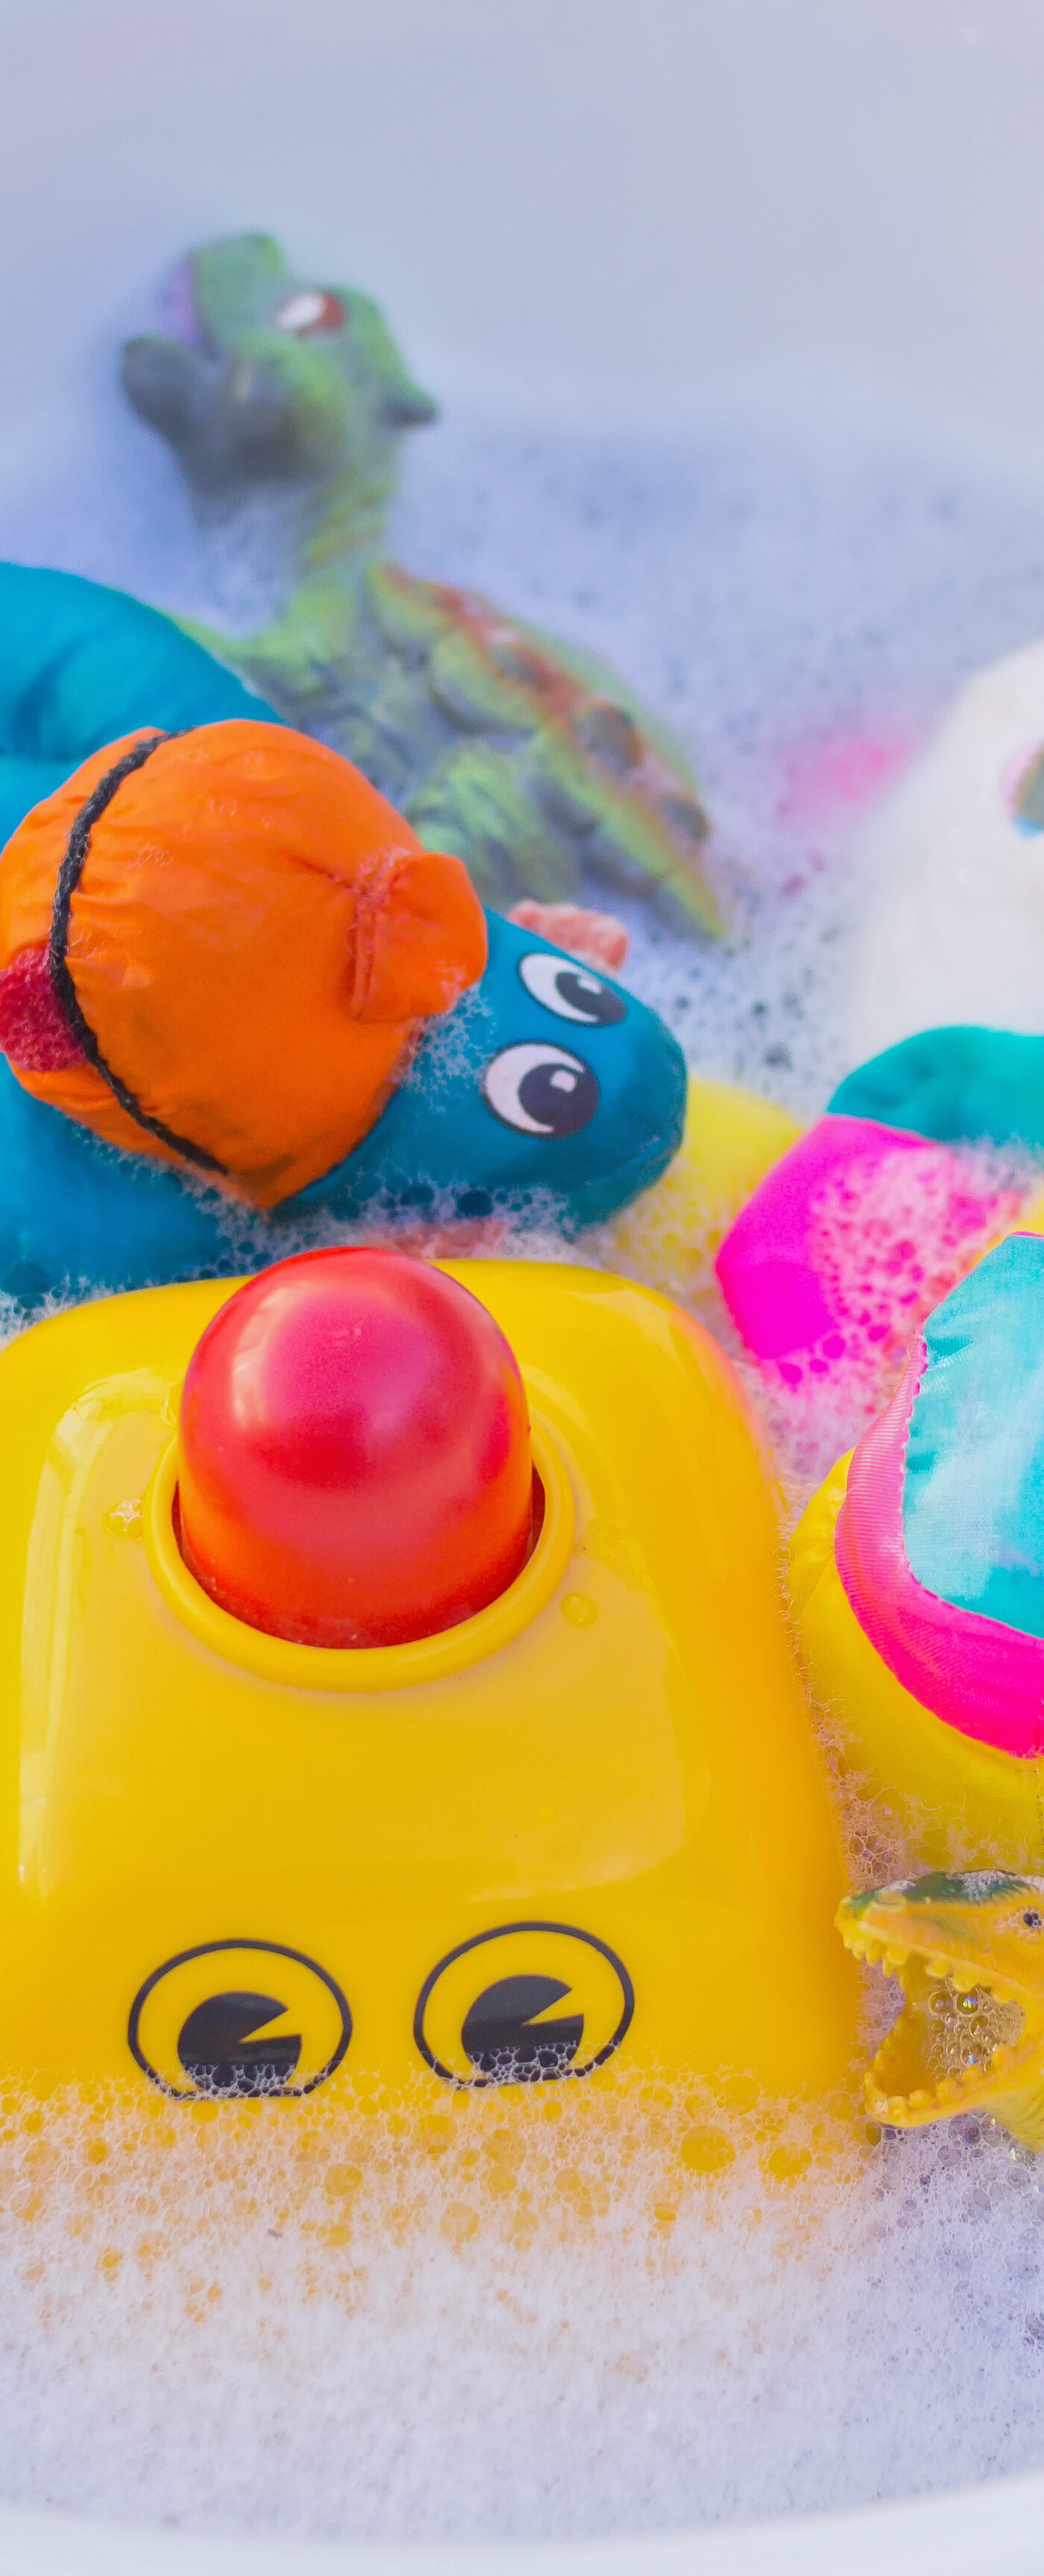 How To Clean Toys the Non-Toxic Way